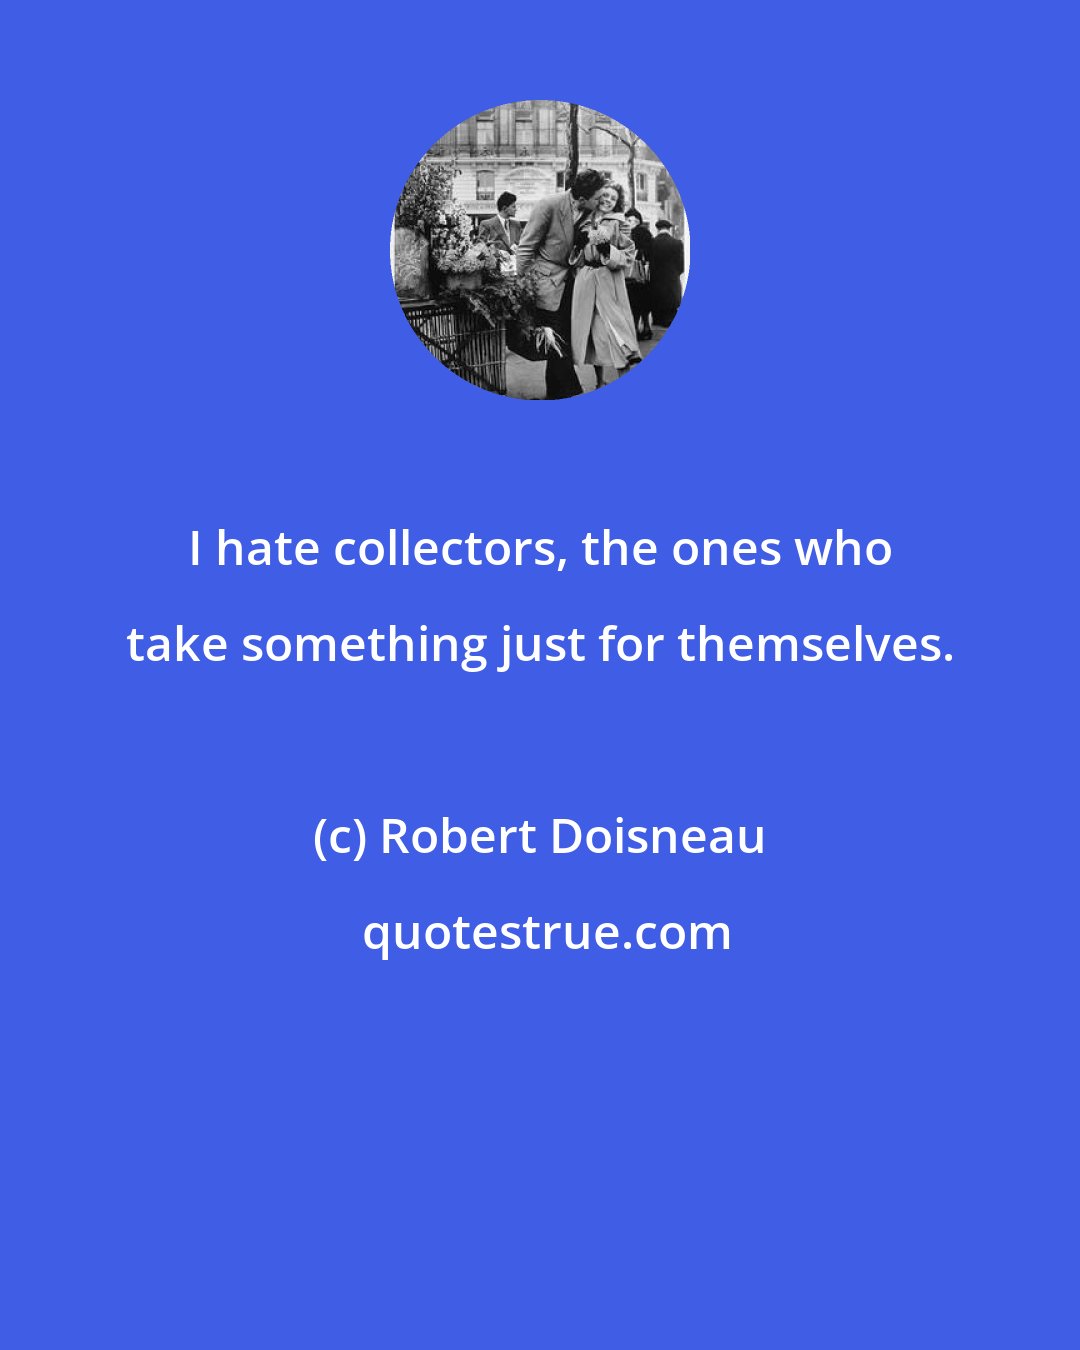 Robert Doisneau: I hate collectors, the ones who take something just for themselves.